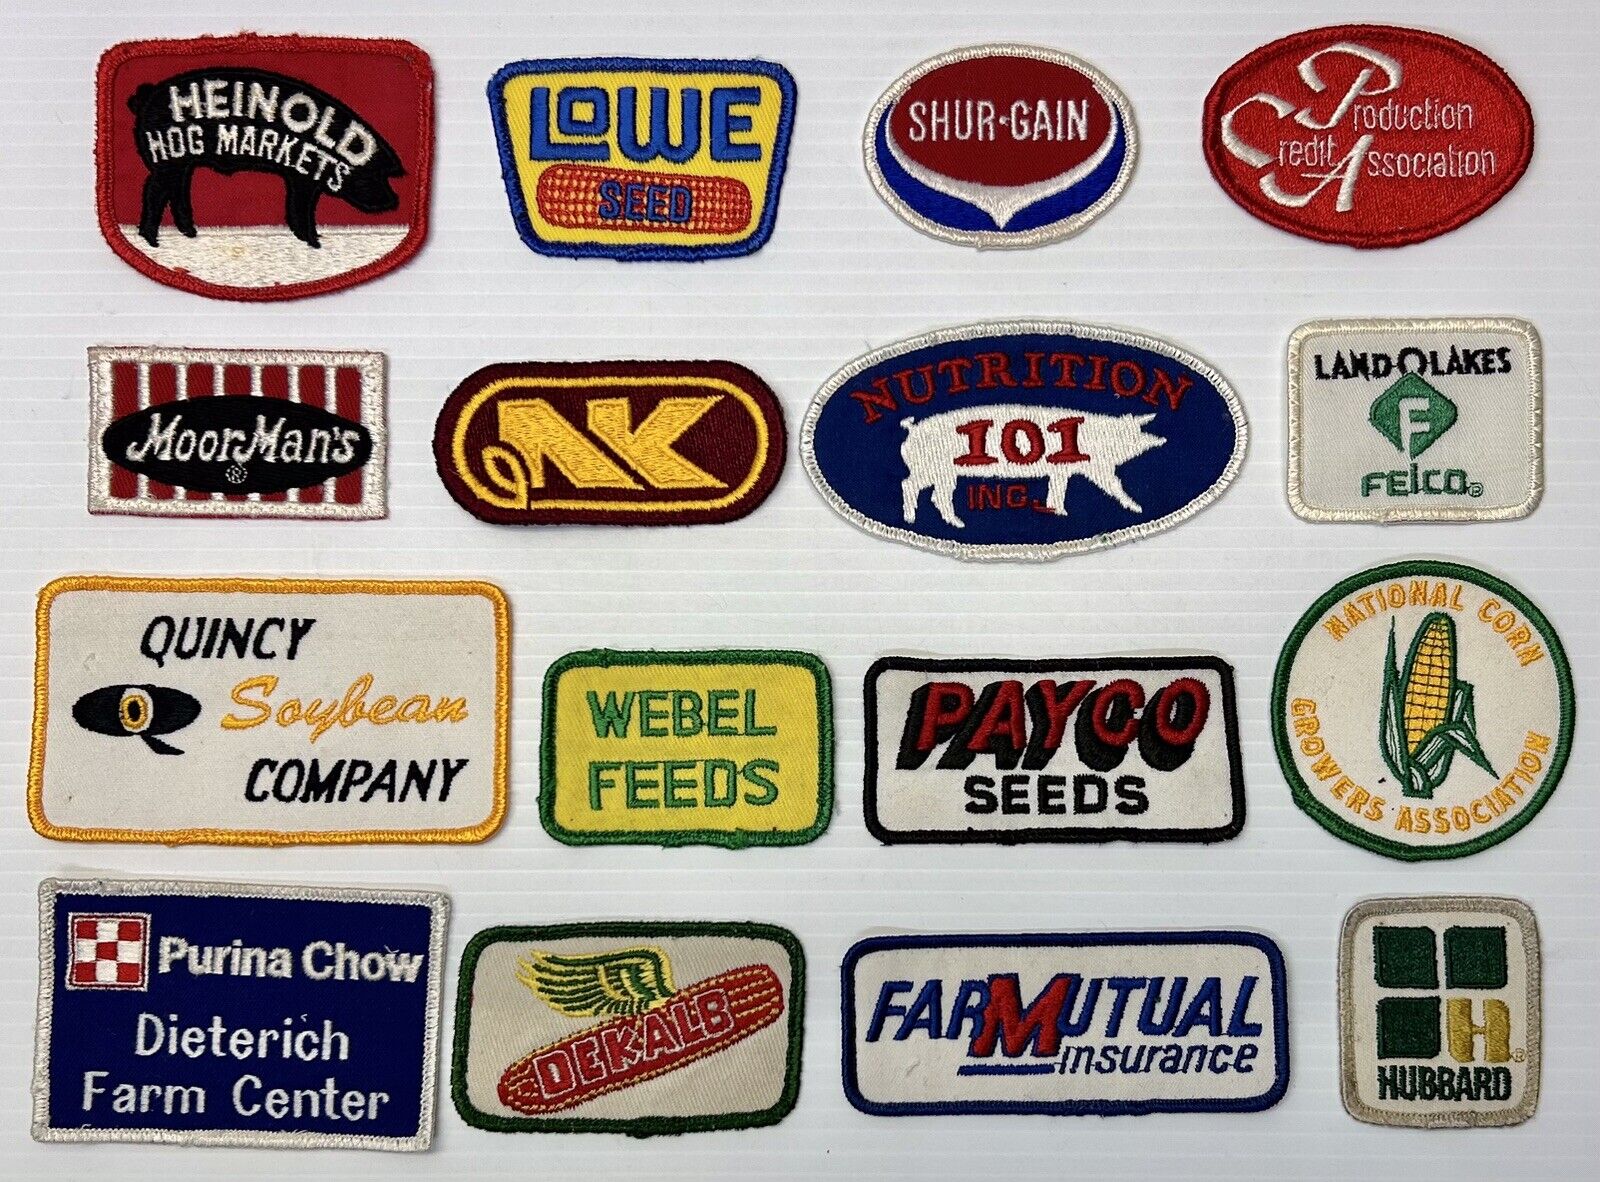 16 Different Vintage Agriculture, Seed, Feed Advertising Embroider Patches